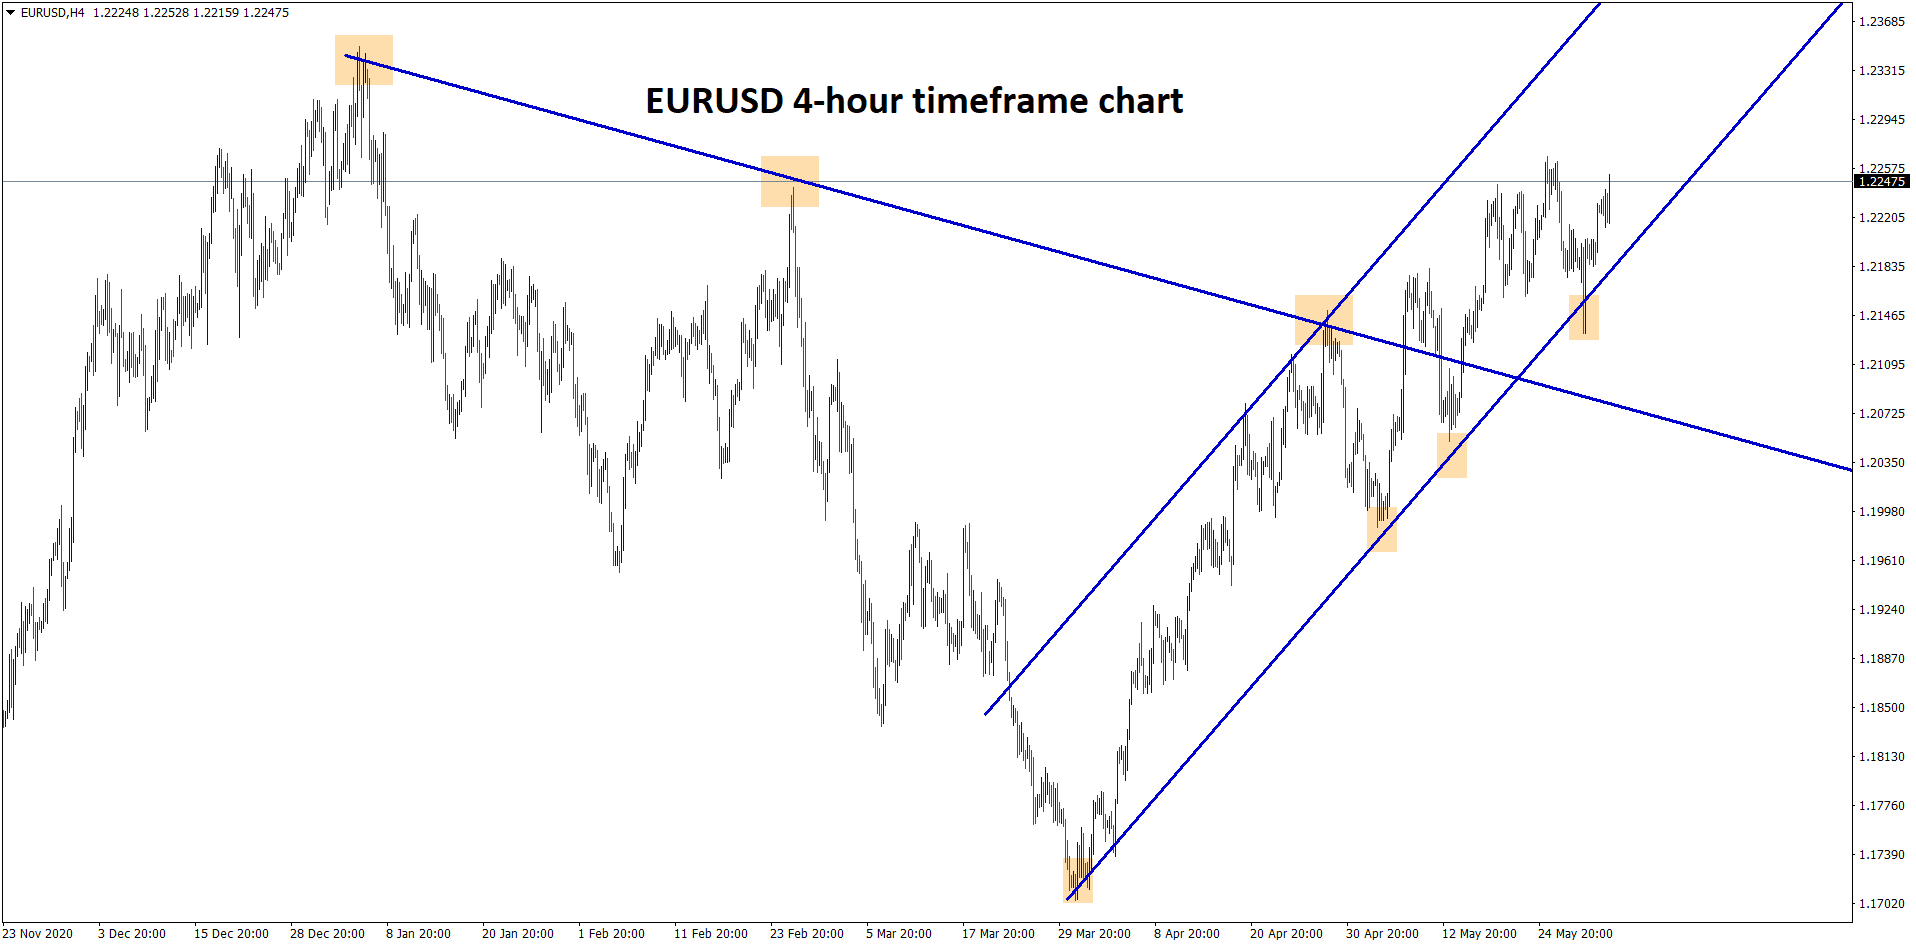 eurusd moving in an uptrend continuously breaking higher highs